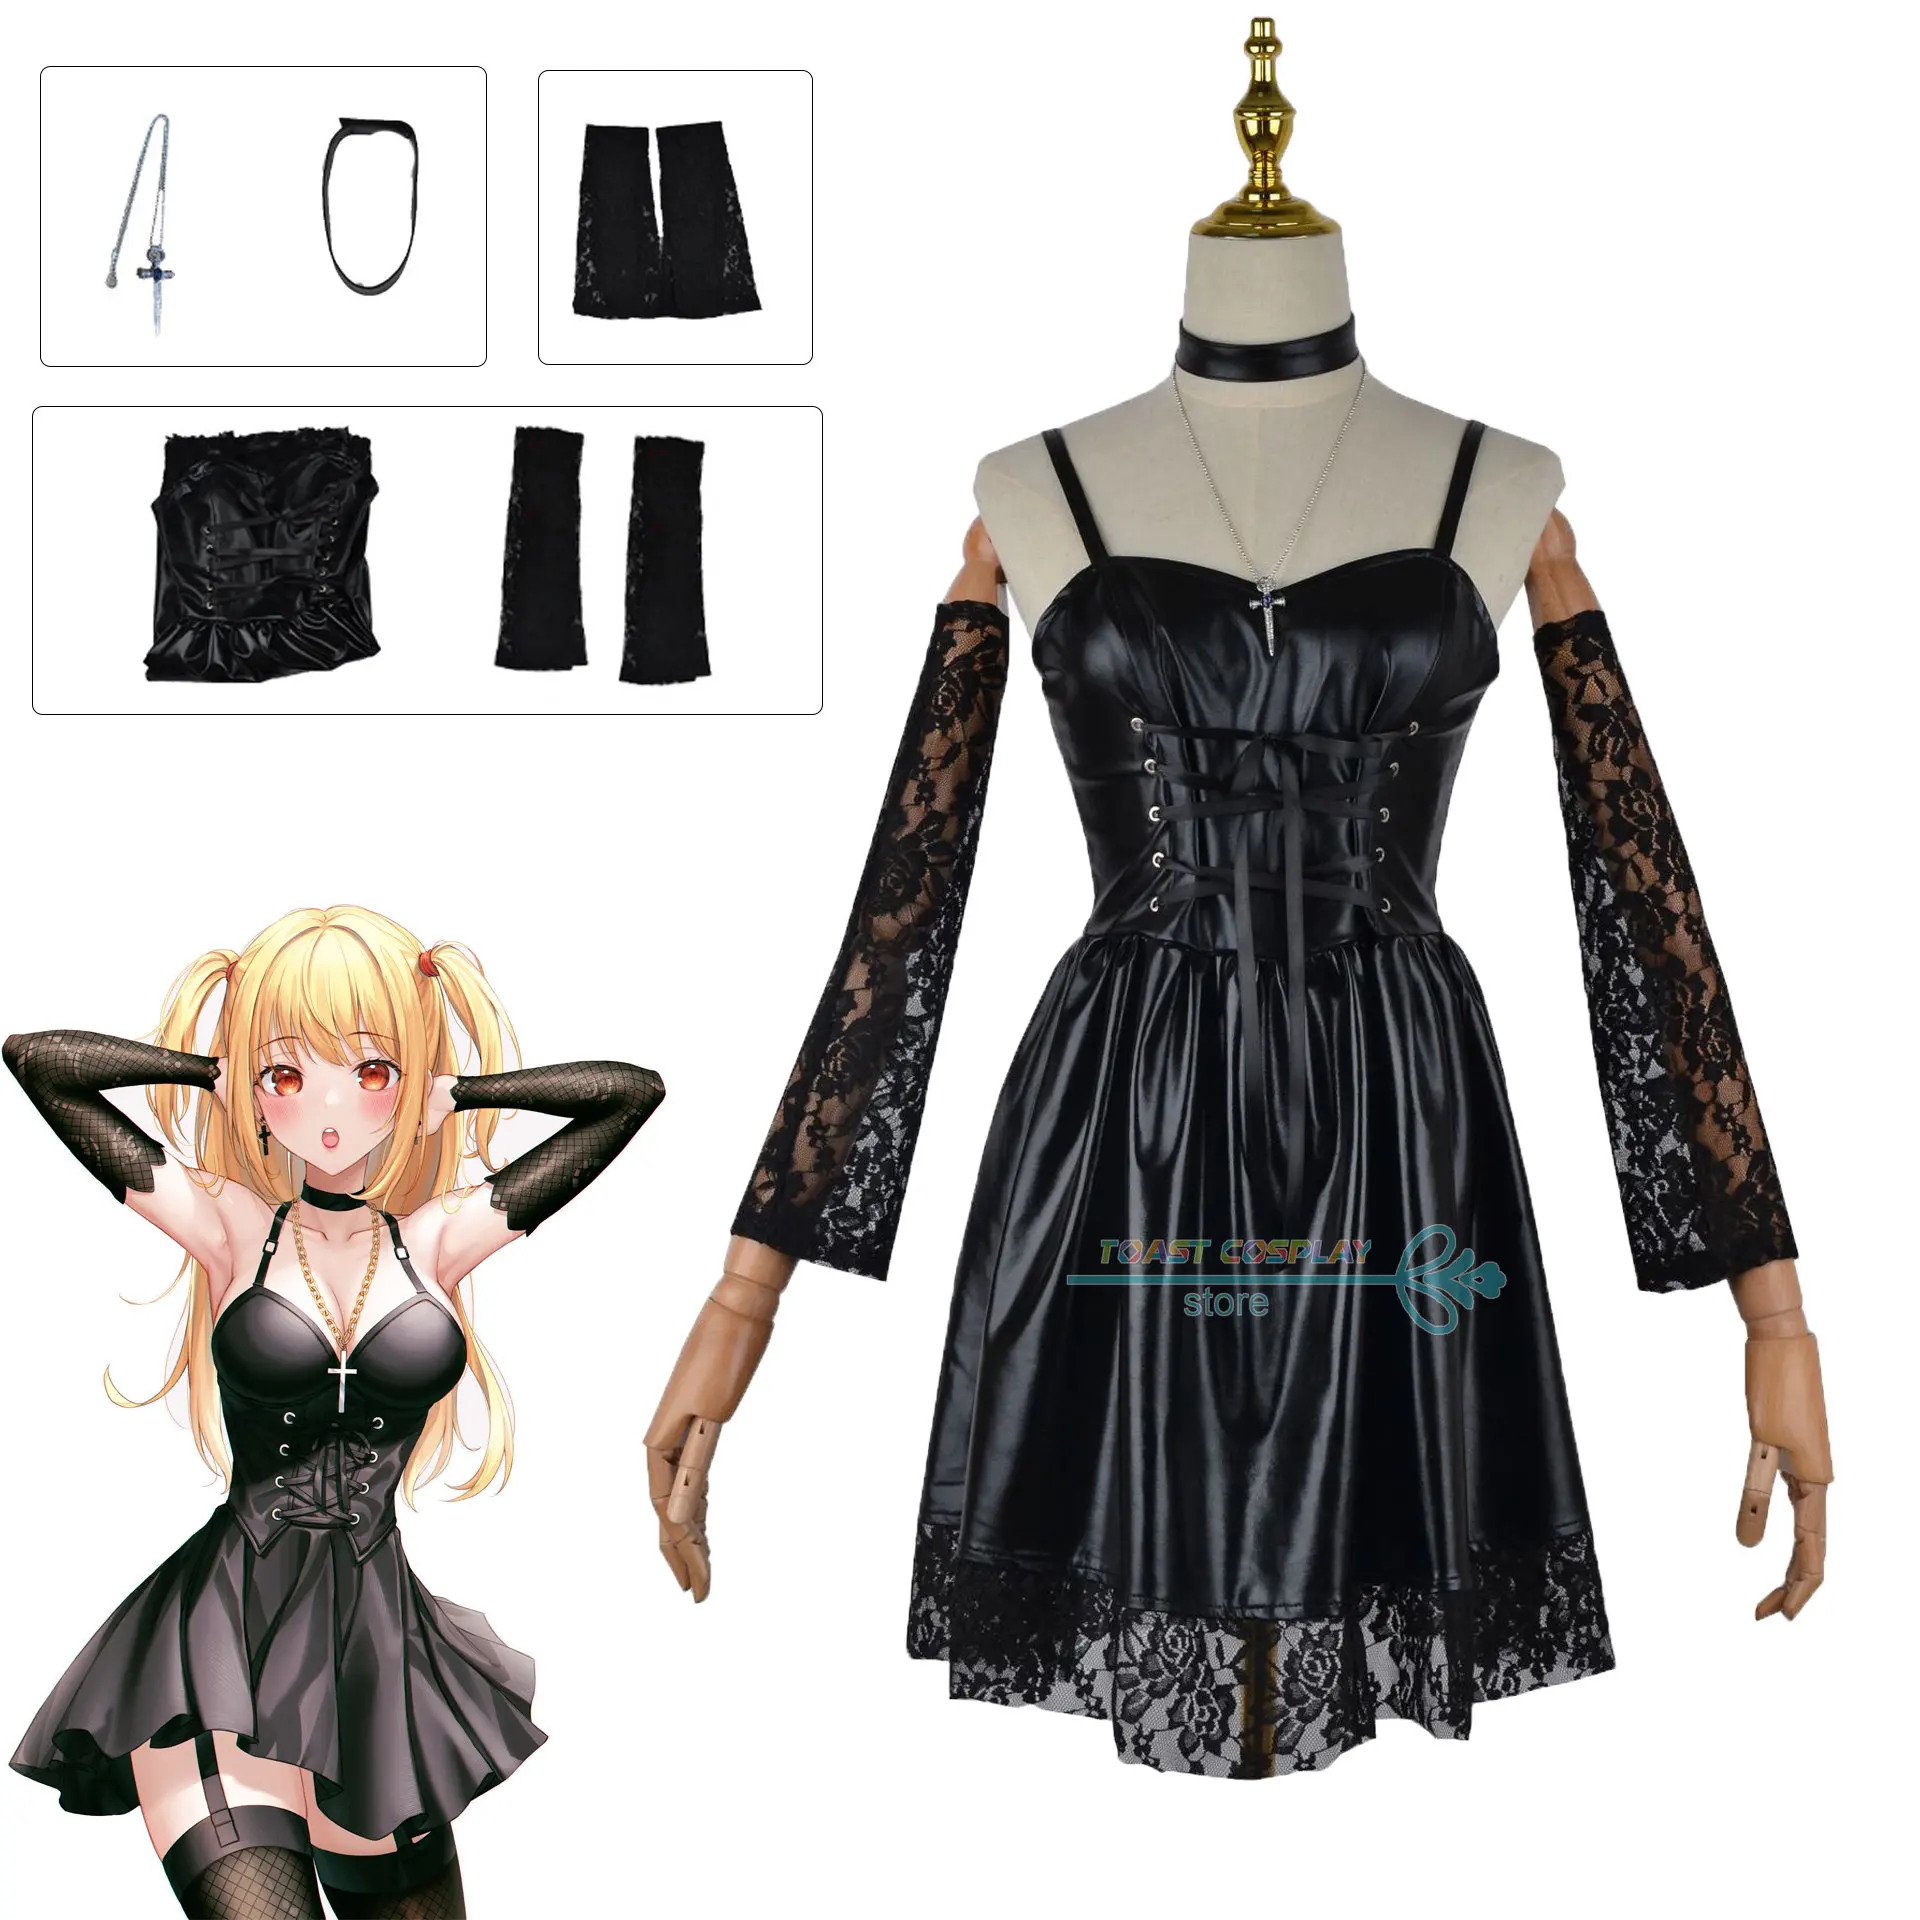 

Death Note Cosplay Anime Misa Amane Costume Faux Leather Sexy Black Lolita Sexy Dress Clothing Cosplay Costume Halloween Party